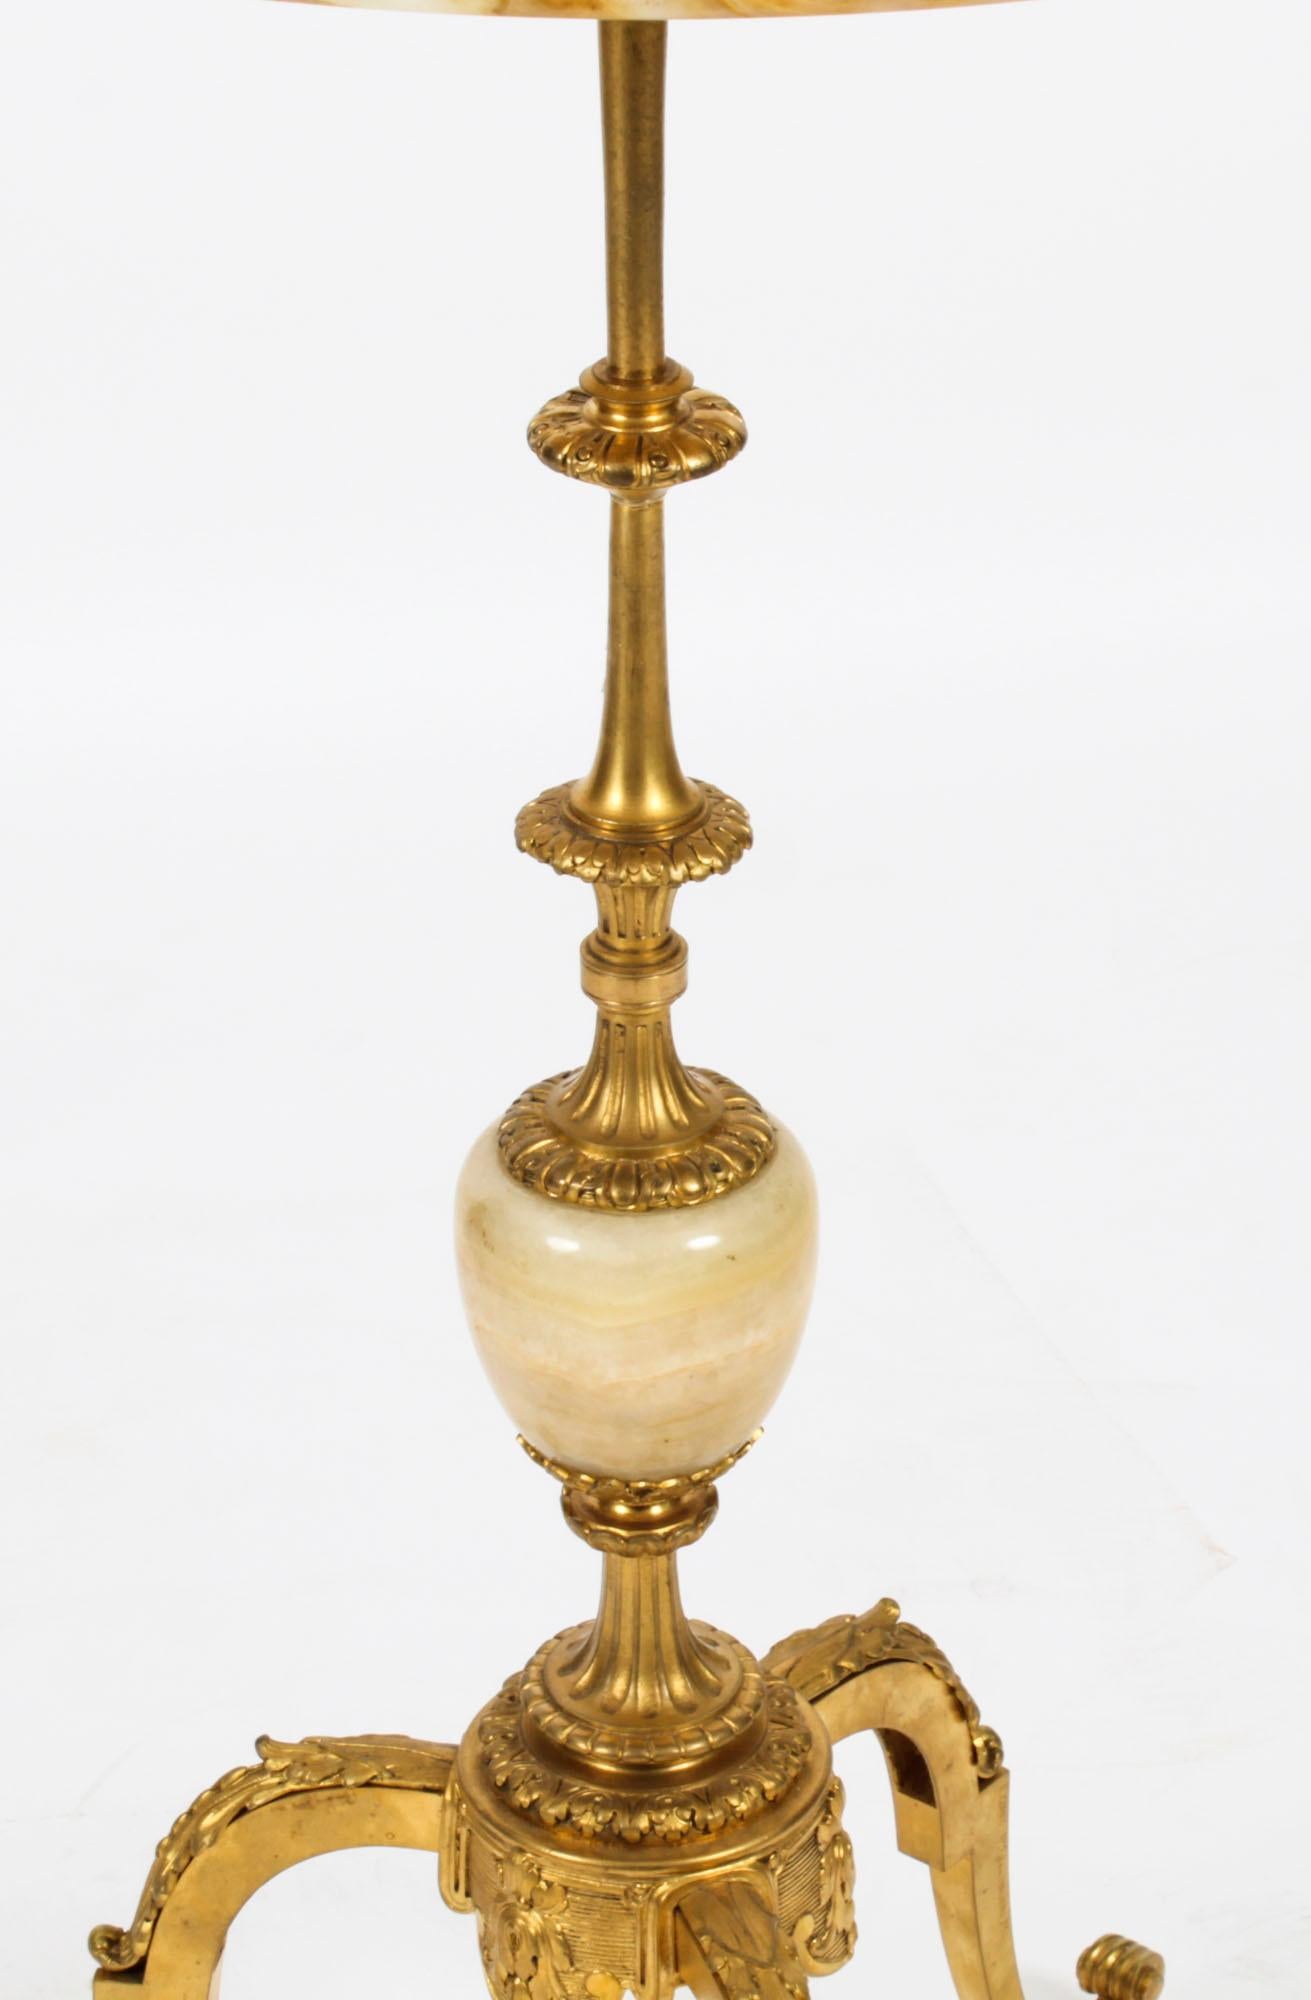 Antique French Ormolu Onyx Topped Occasional Table 19th Century For Sale 4